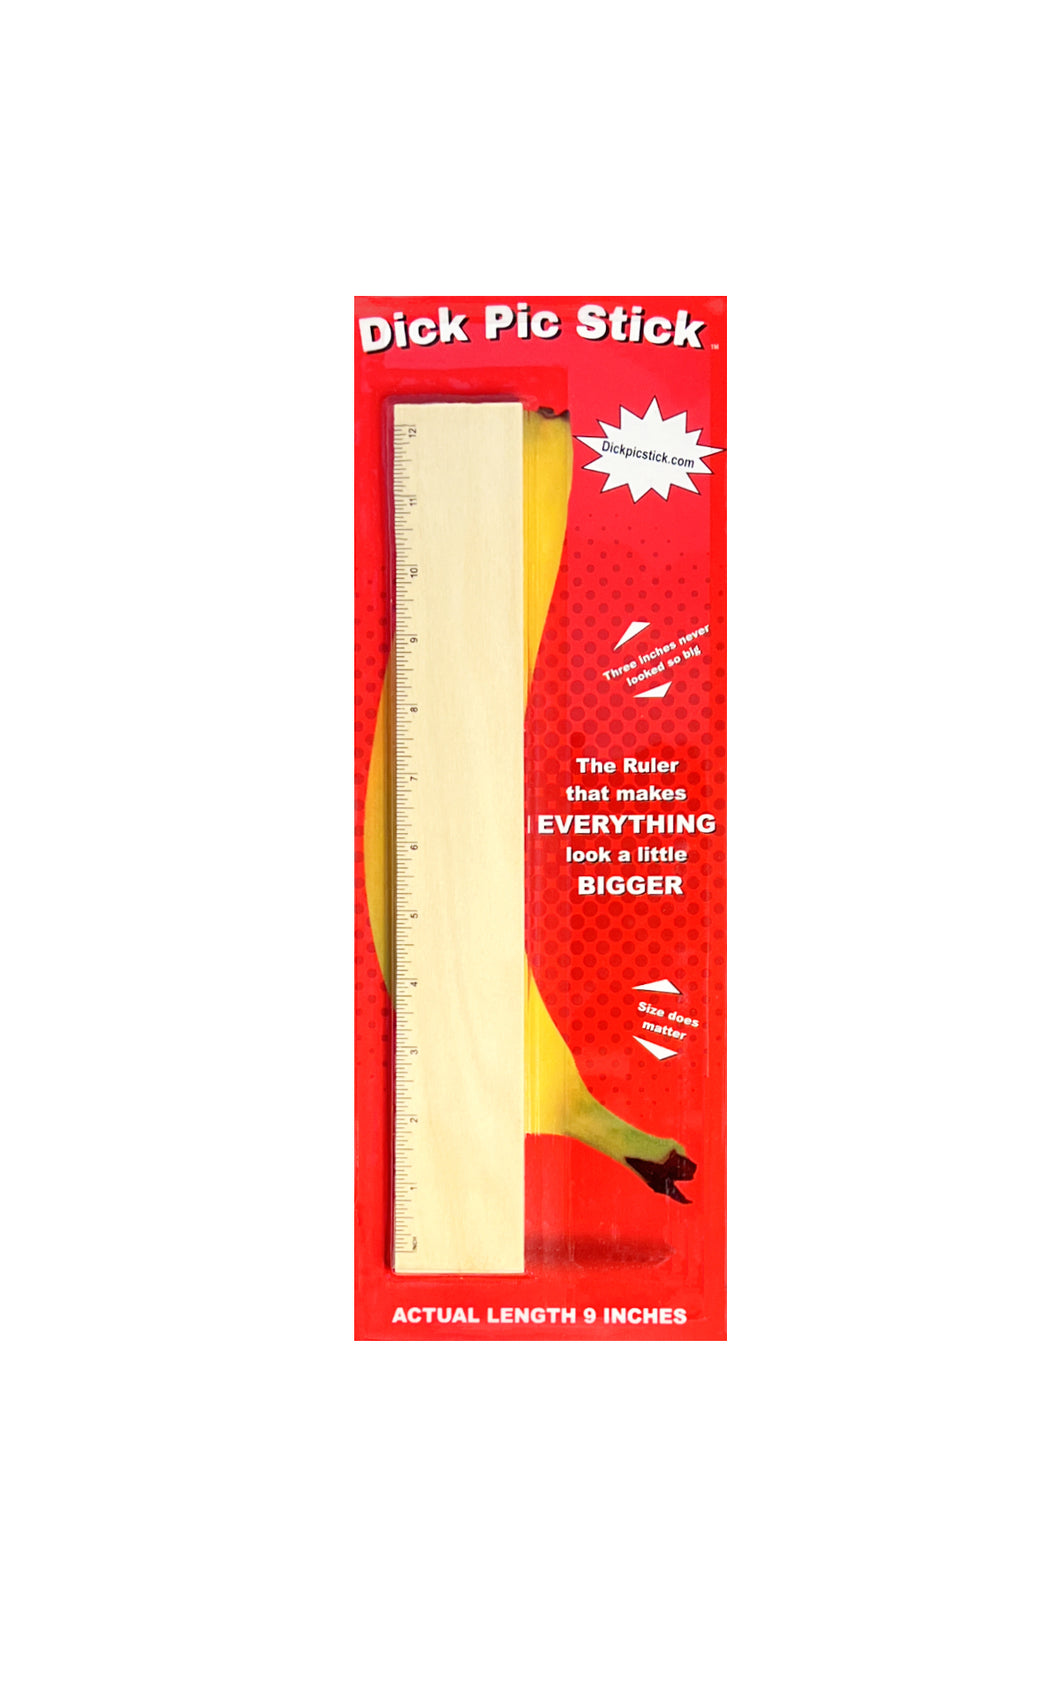 The Dick Pic Stick